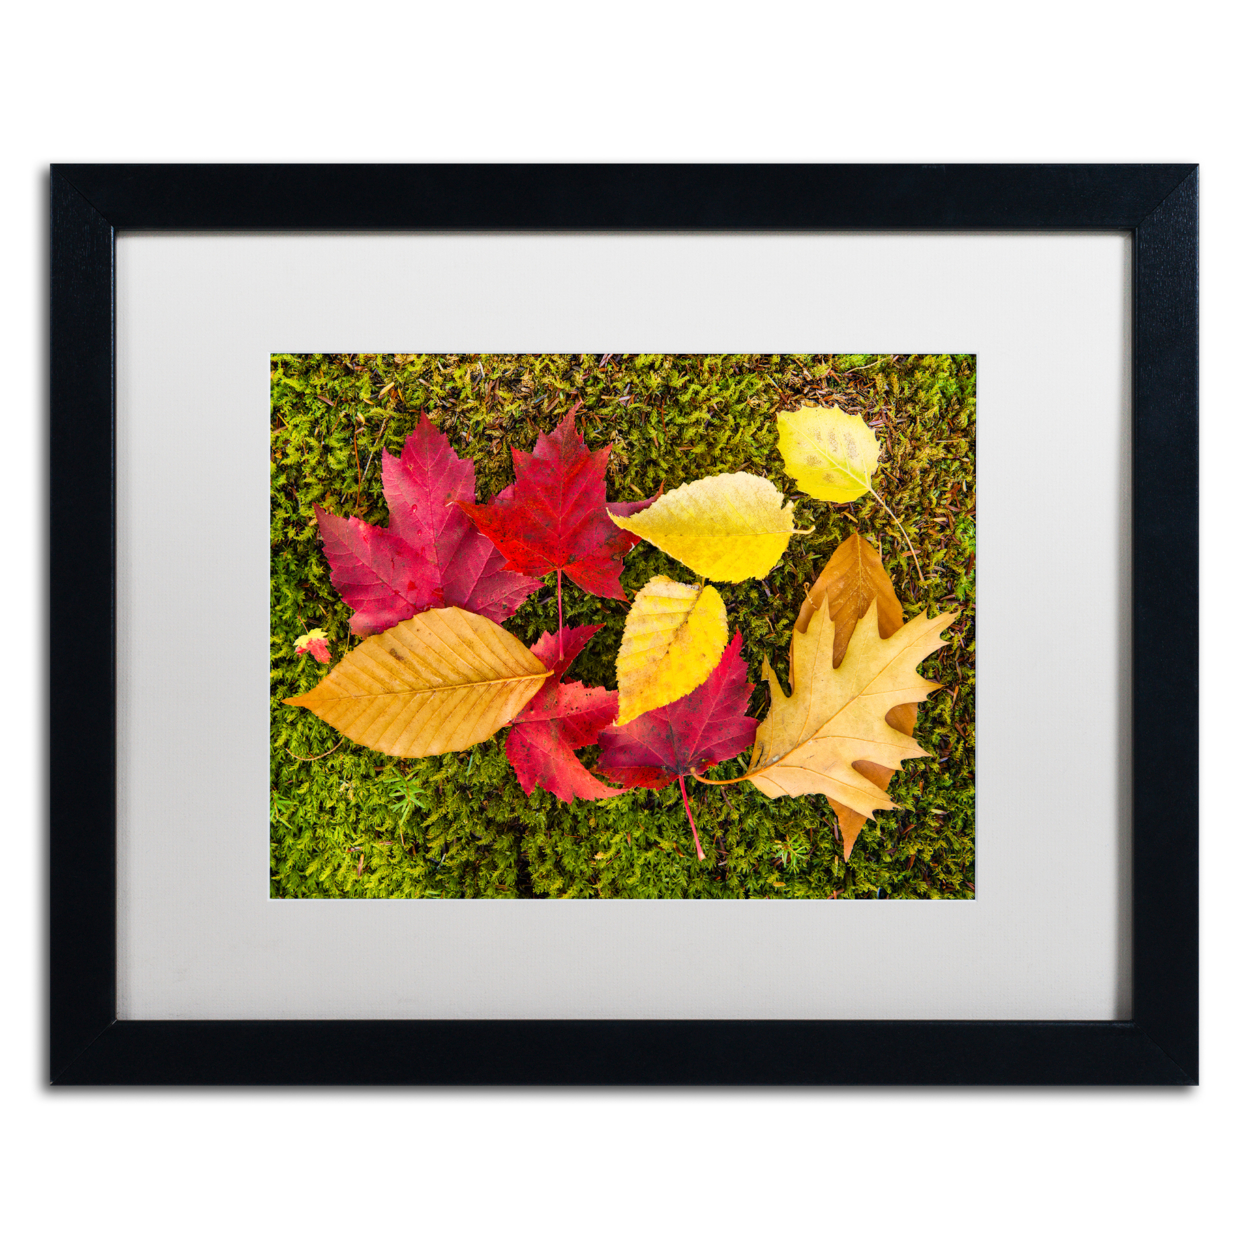 Michael Blanchette Photography 'Leaves On Moss' Black Wooden Framed Art 18 X 22 Inches